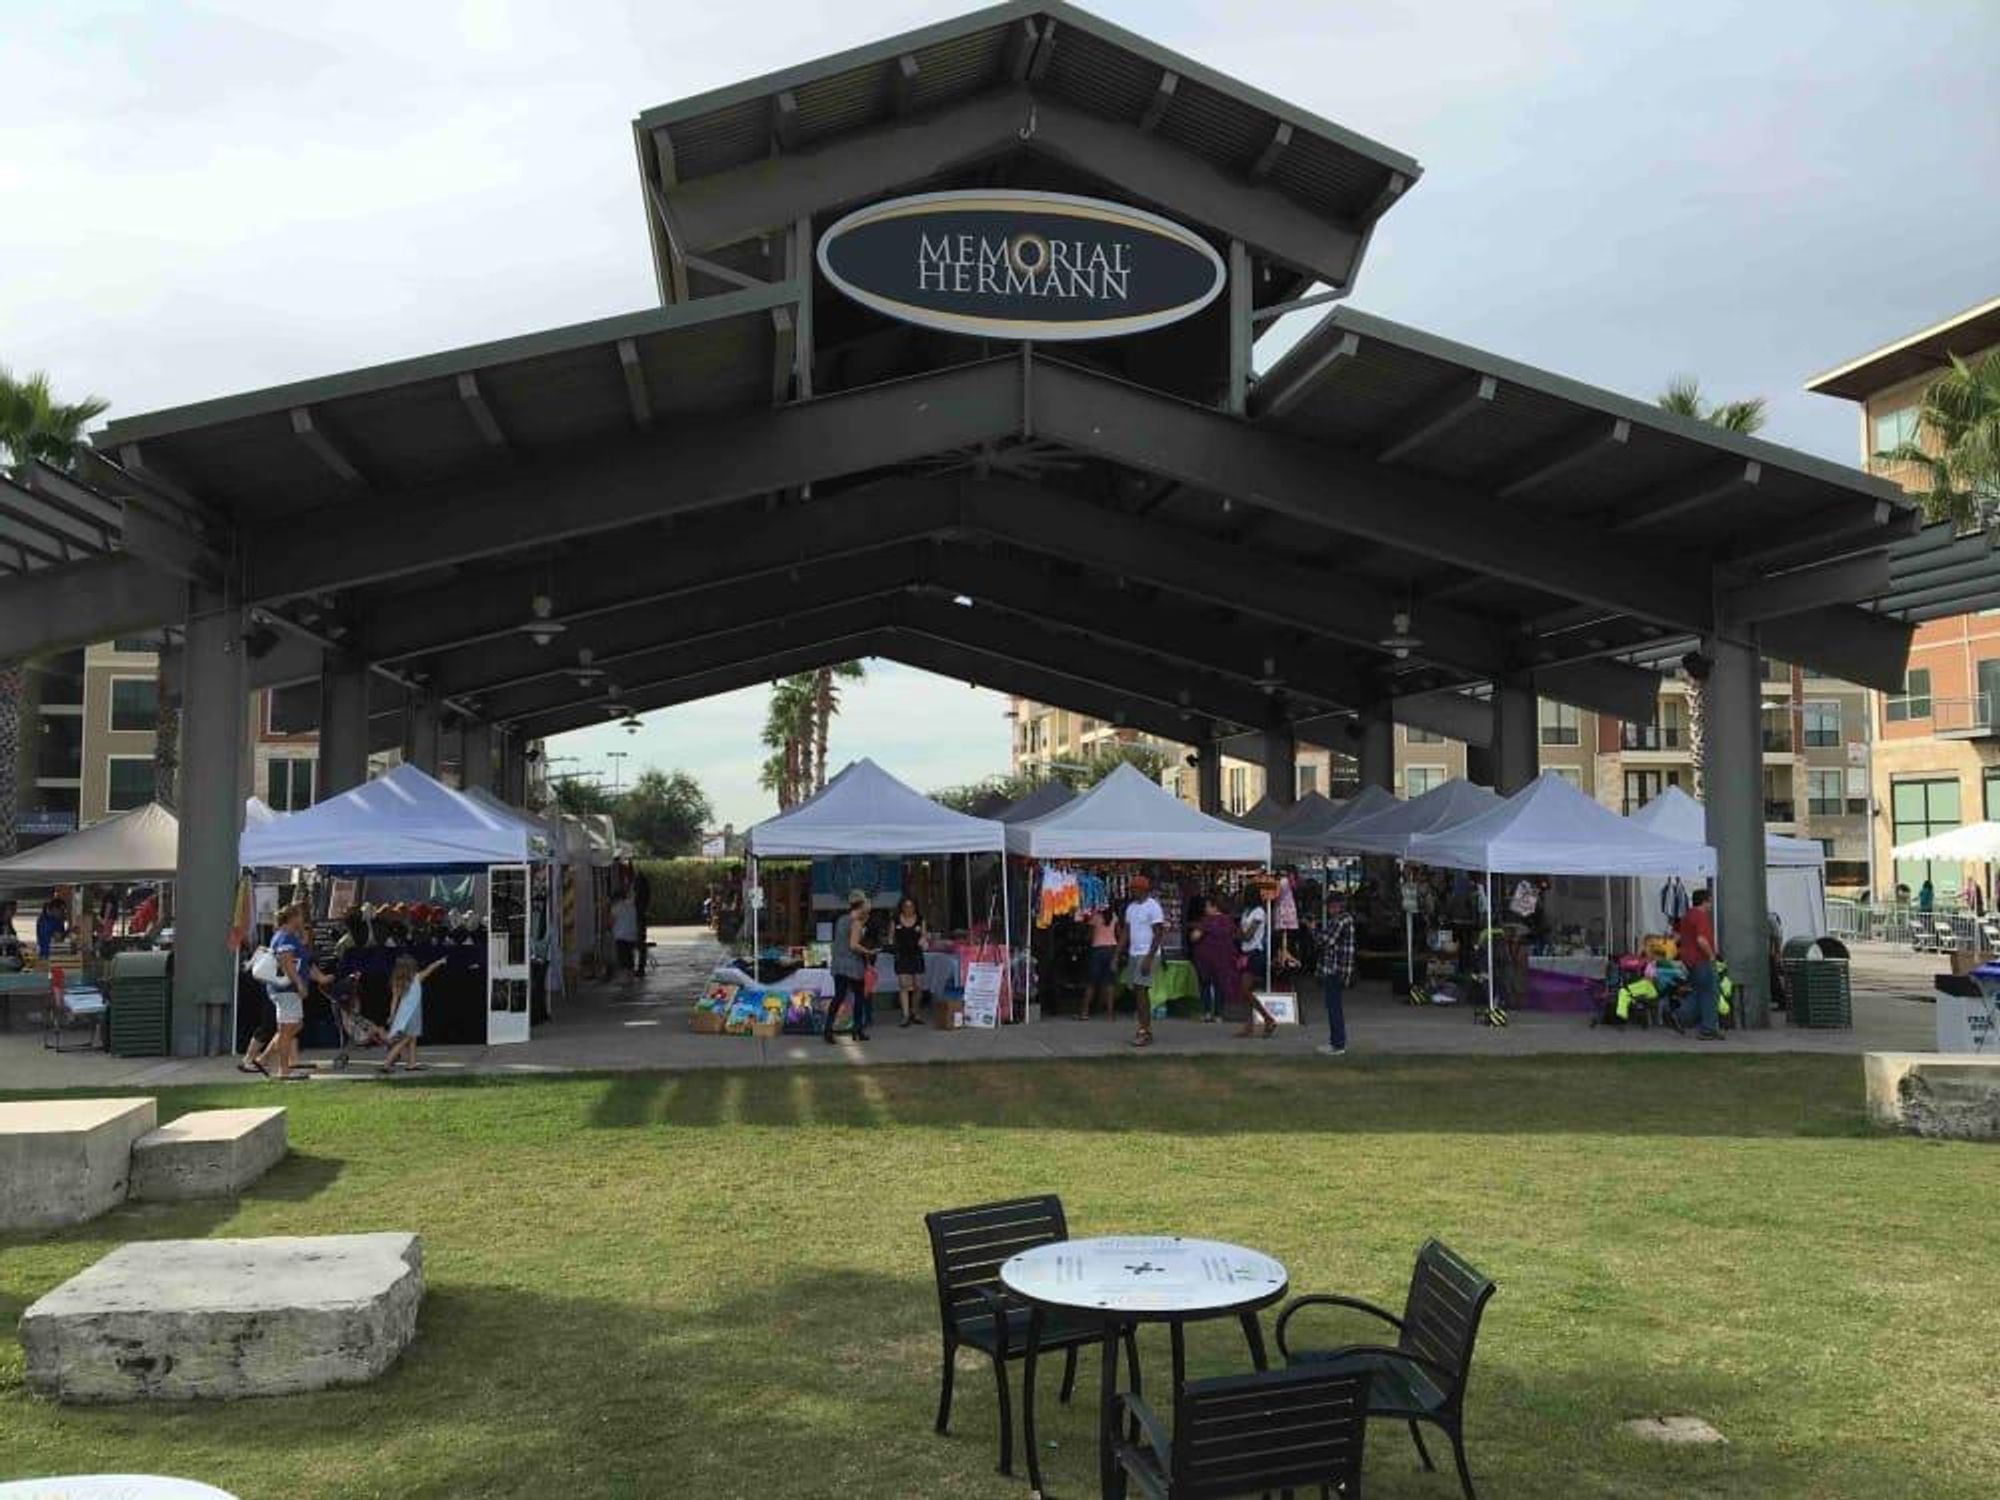 Pearland Convention & Visitors Bureau presents Pearland Art & Crafts on the Pavilion